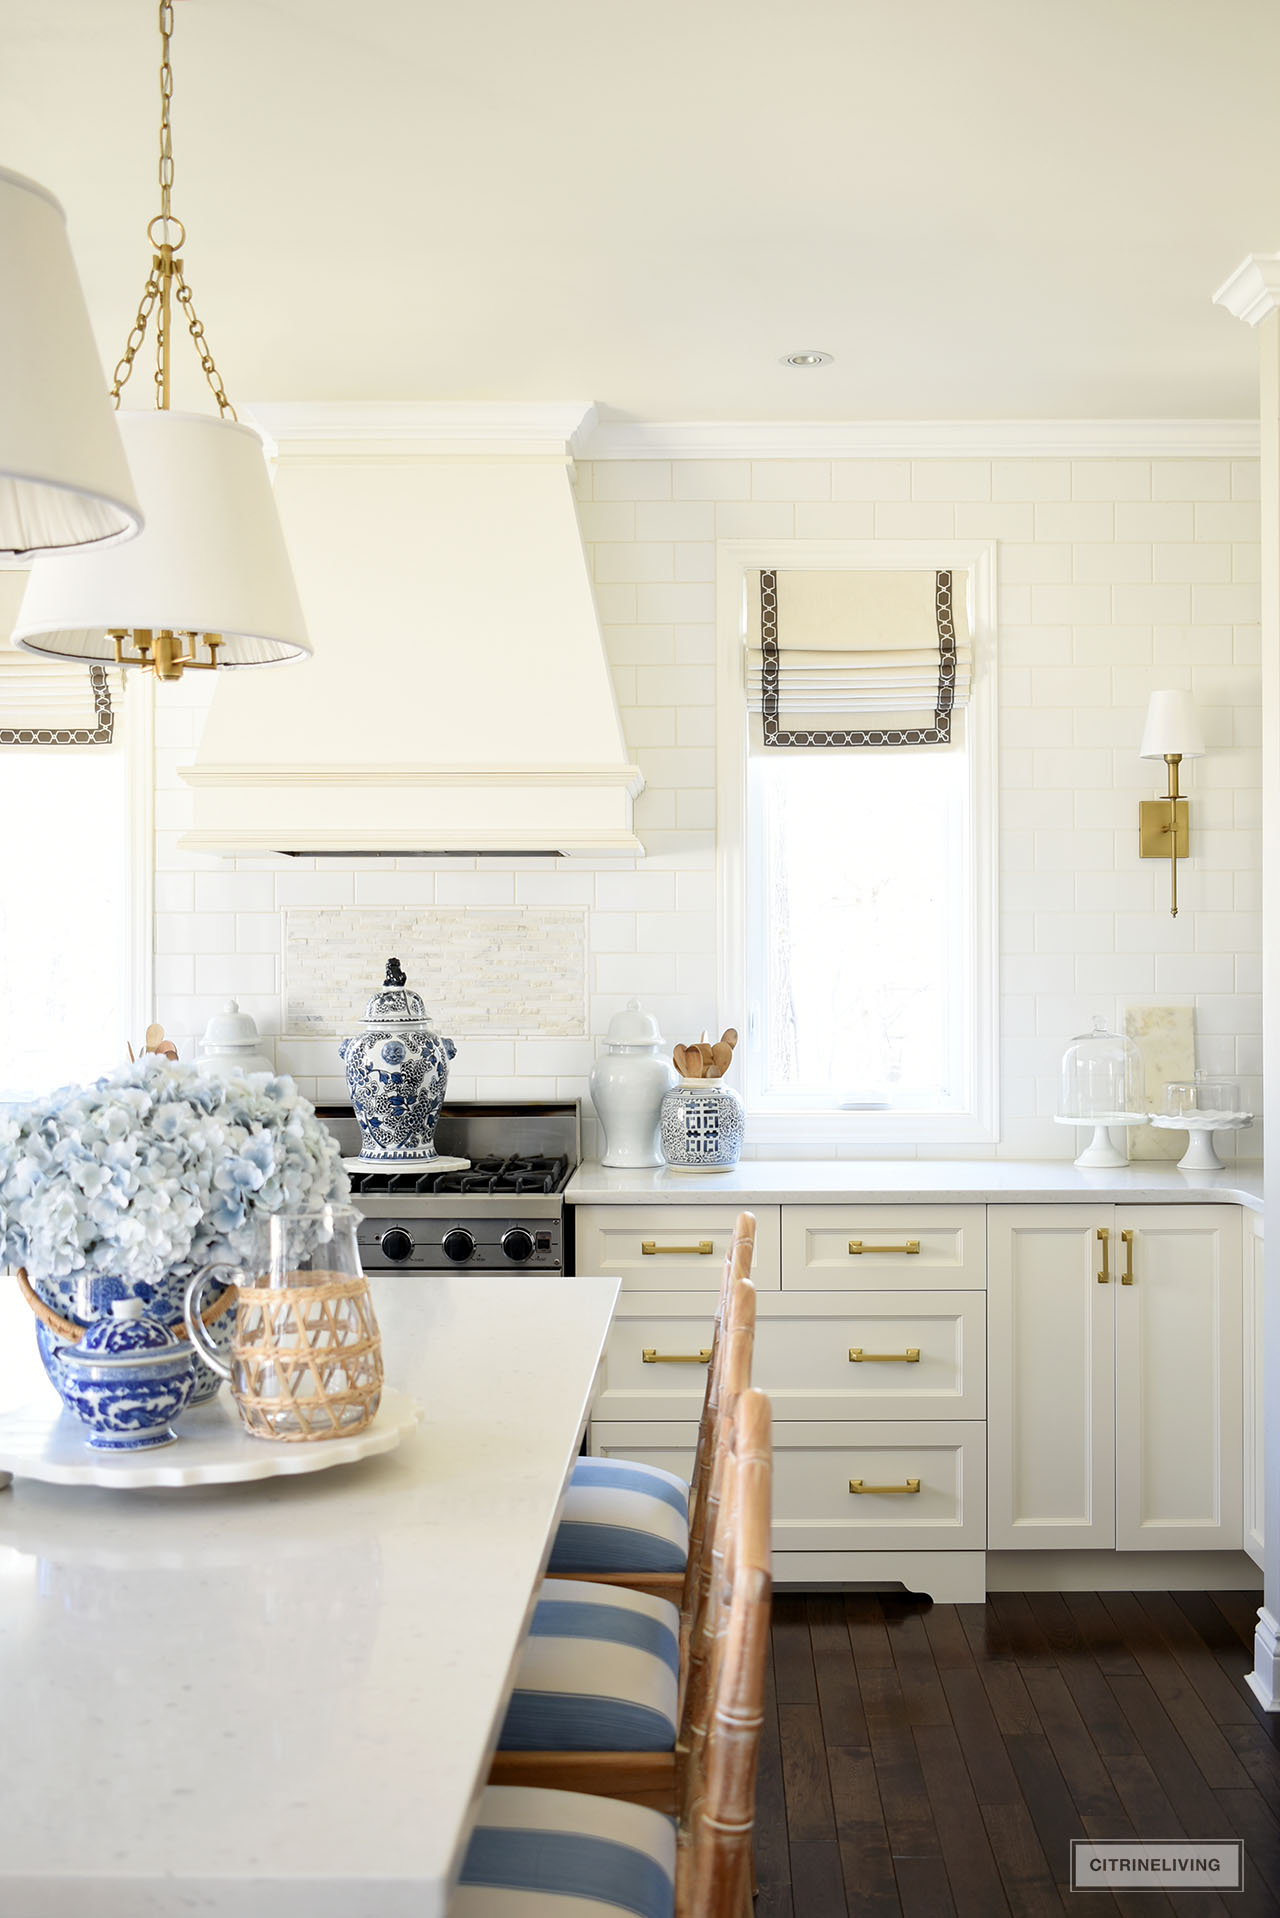 Beautiful white kitchen styled with simple accents for spring.